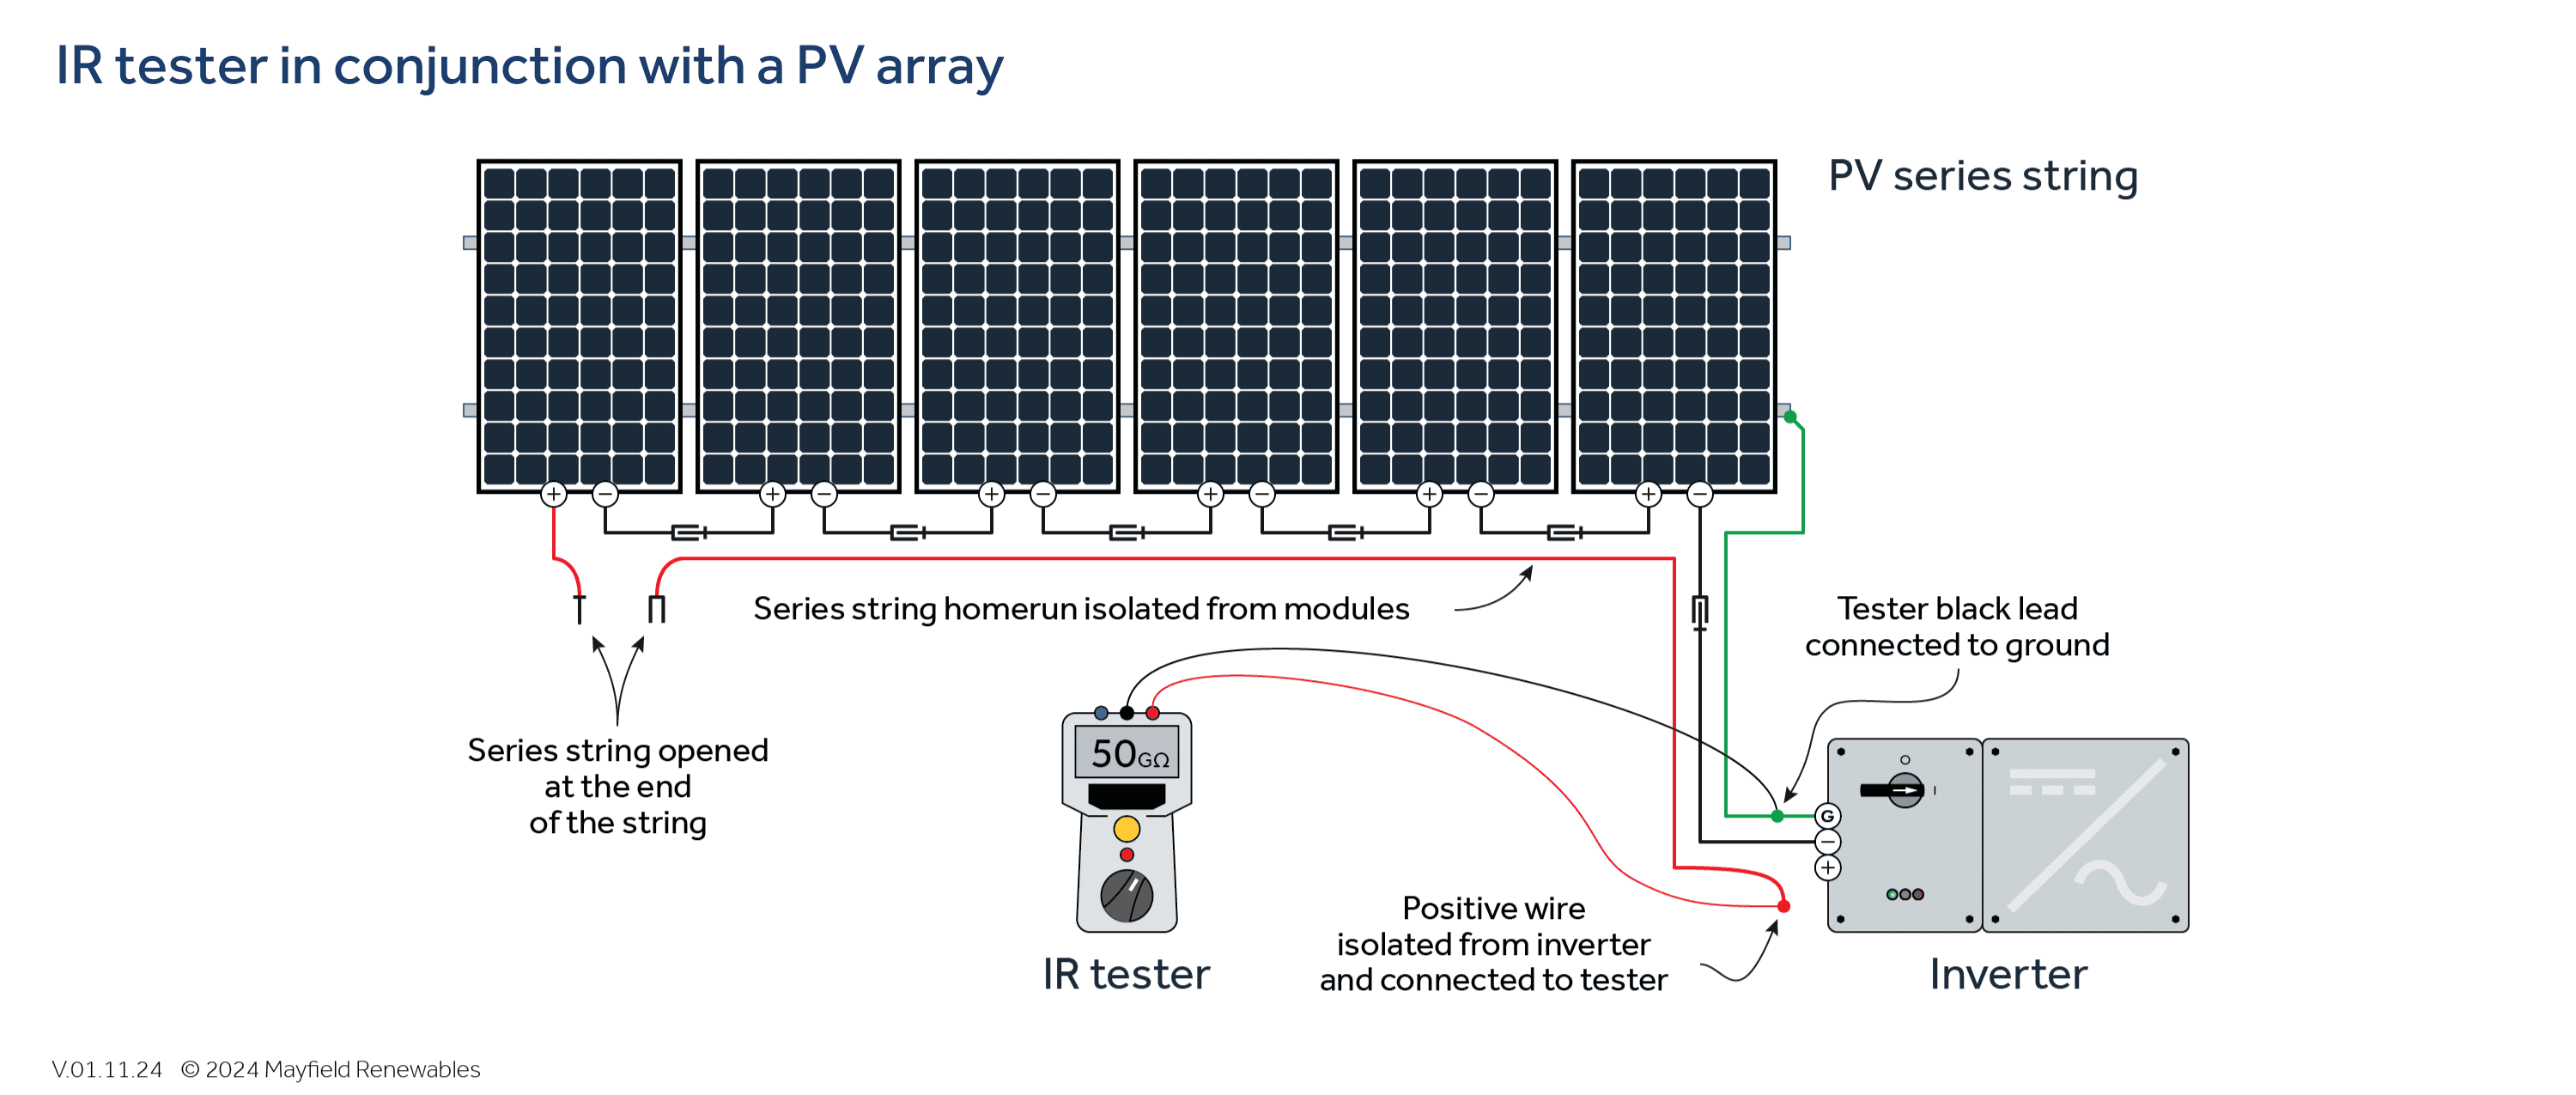 A diagram of a solar panel with a battery, highlighting insulation resistance testing as per the 2023 NFPA 70B guidelines.